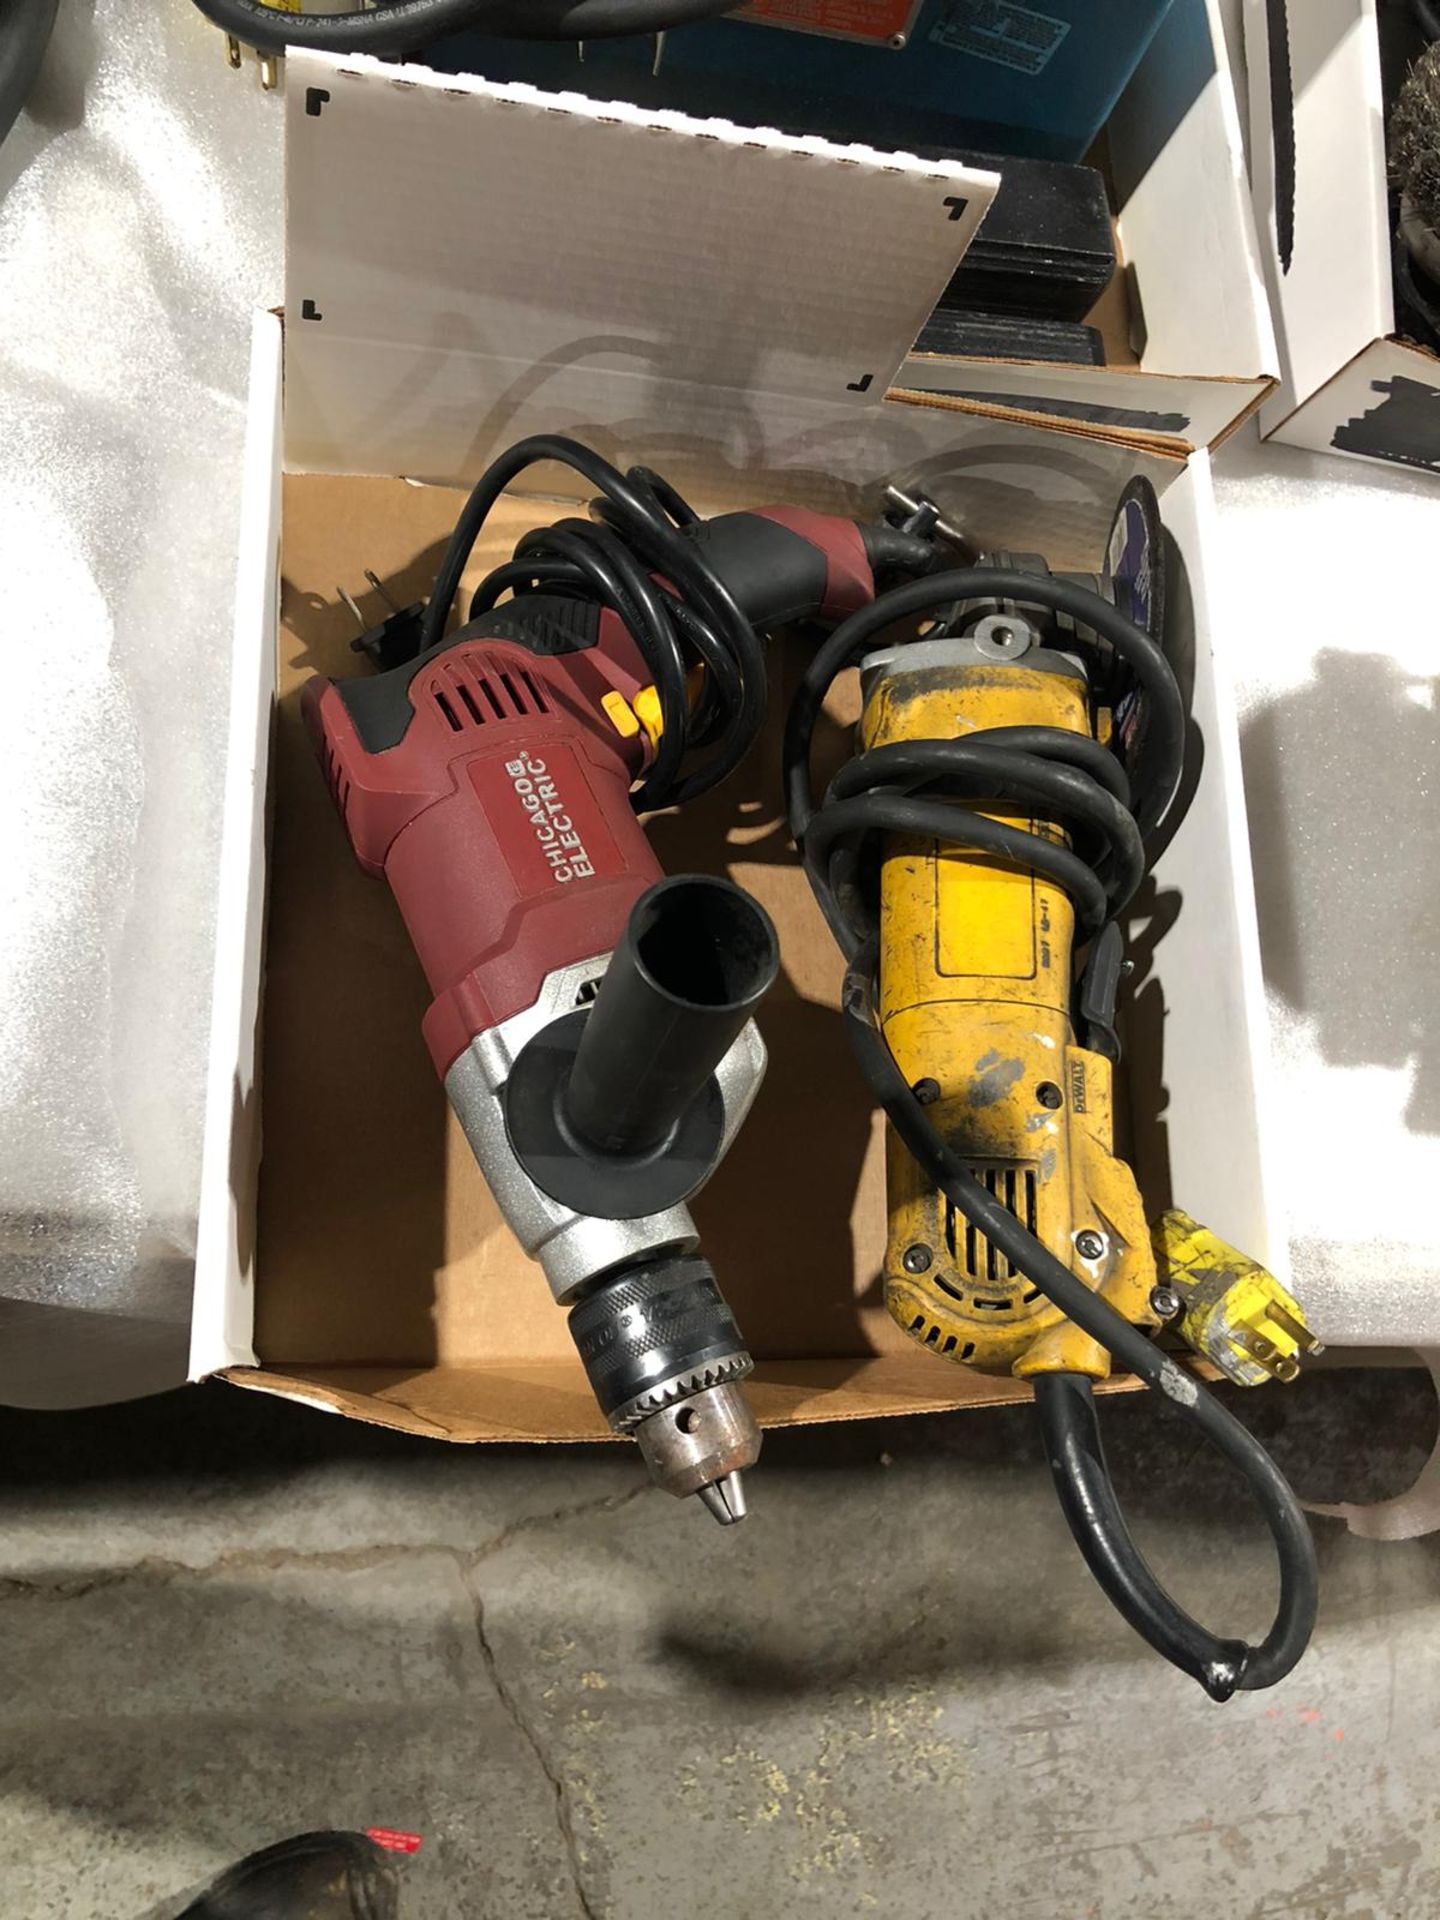 Lot of 2 (2 units) Heavy Duty Drill and Grinder Units *** FROM 5-STAR RIGGING - Image 2 of 2